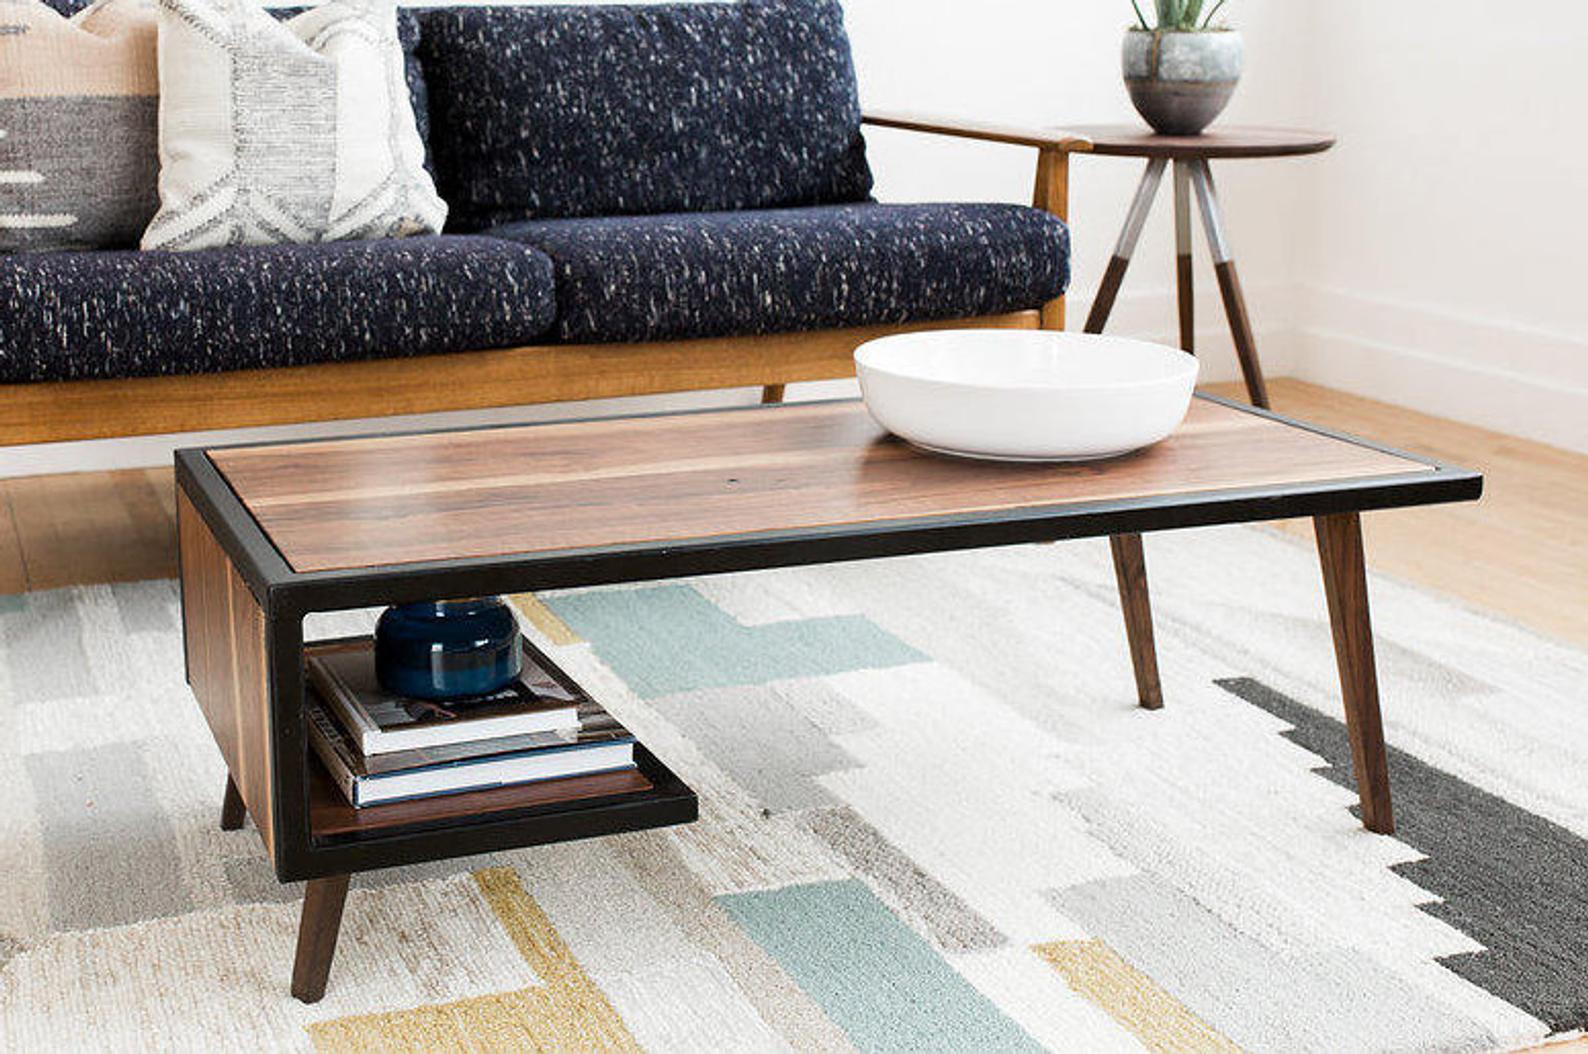 Mid Century Modern Style Coffee Tables You'll Love - Home